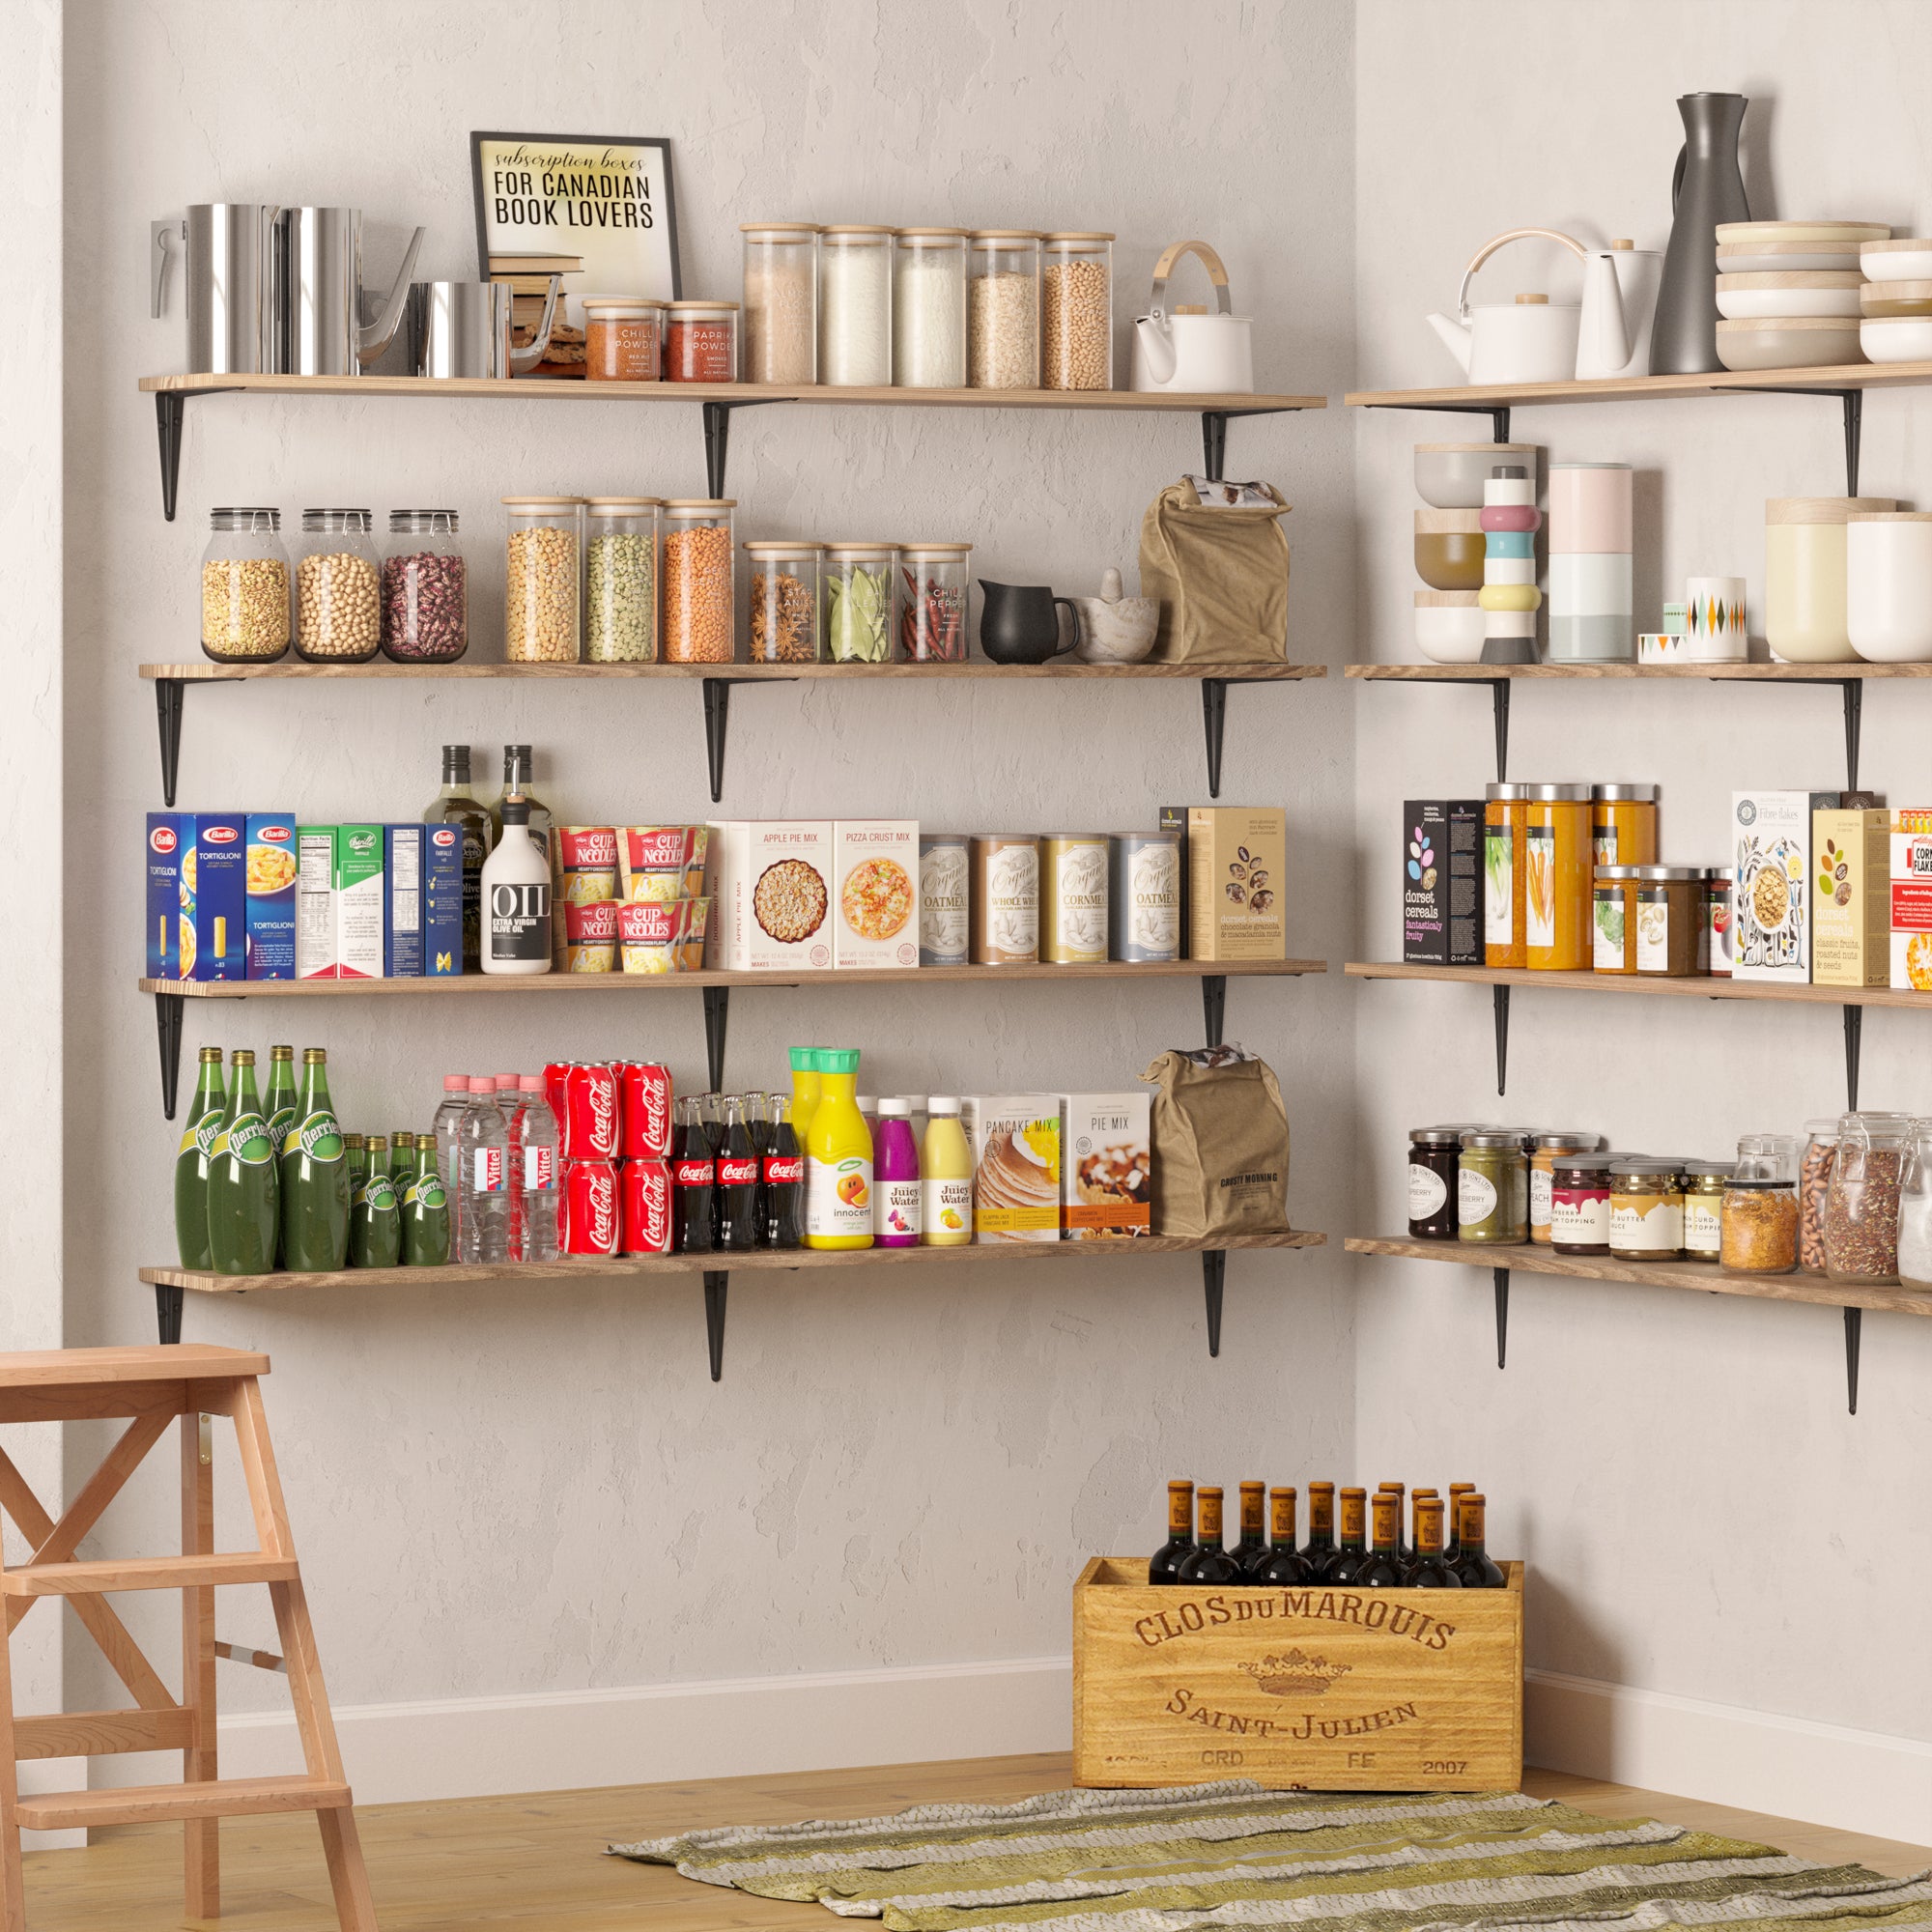 Multiple burnt shelves for wall storage filled with a variety of household items like books, canned foods, and decoratives, creating a practical and attractive storage space.